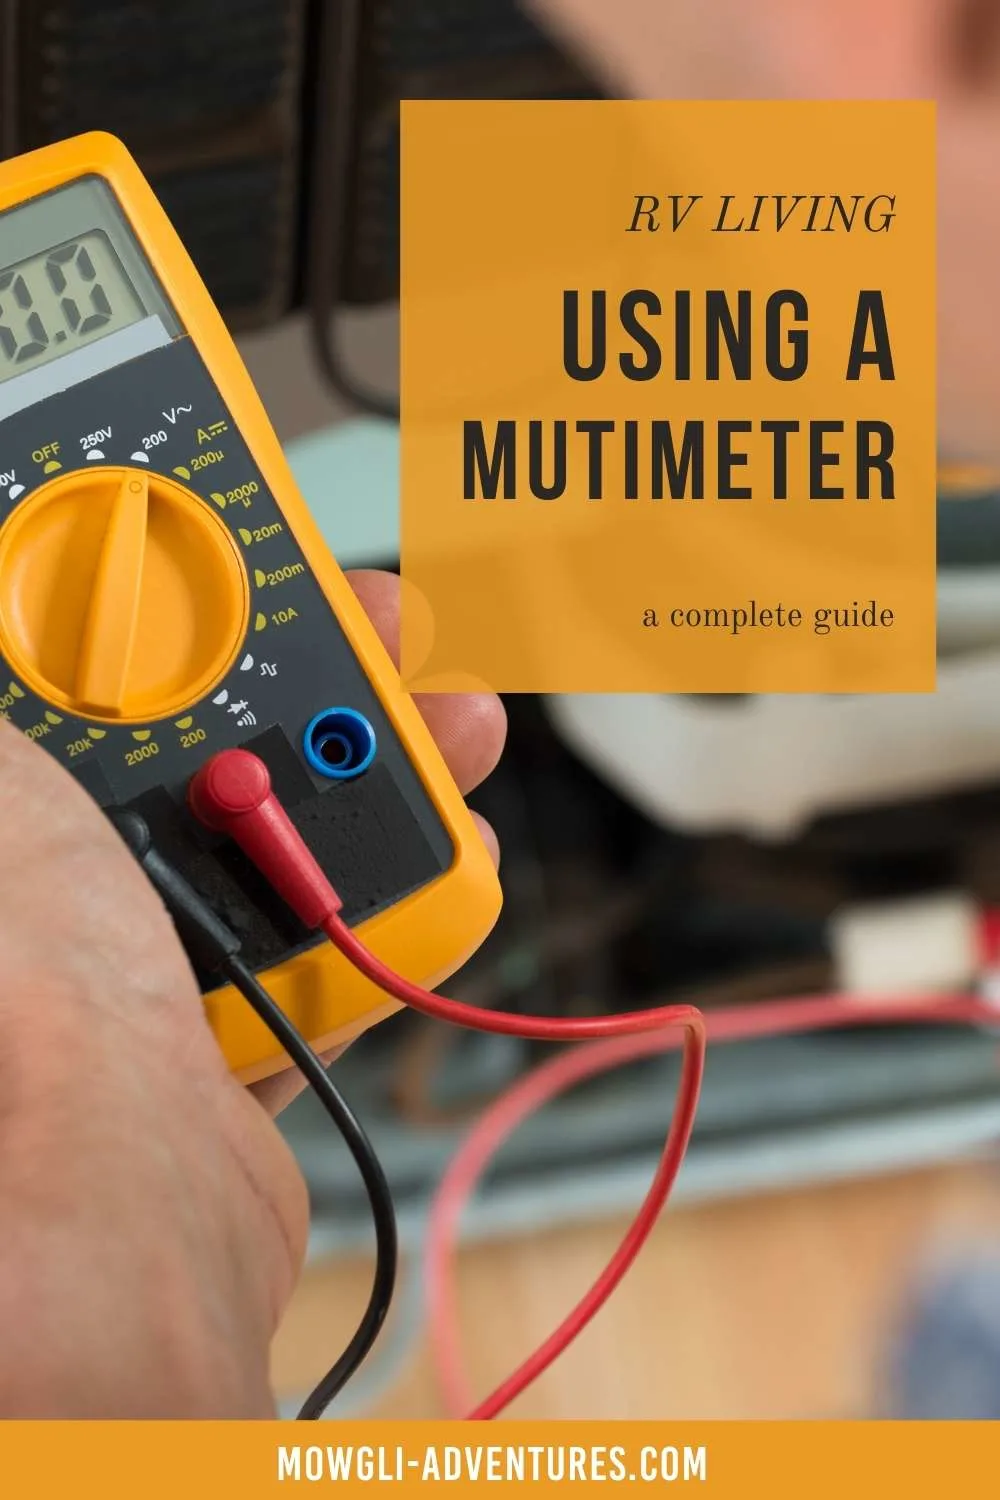 How every RVer can use a Multimeter